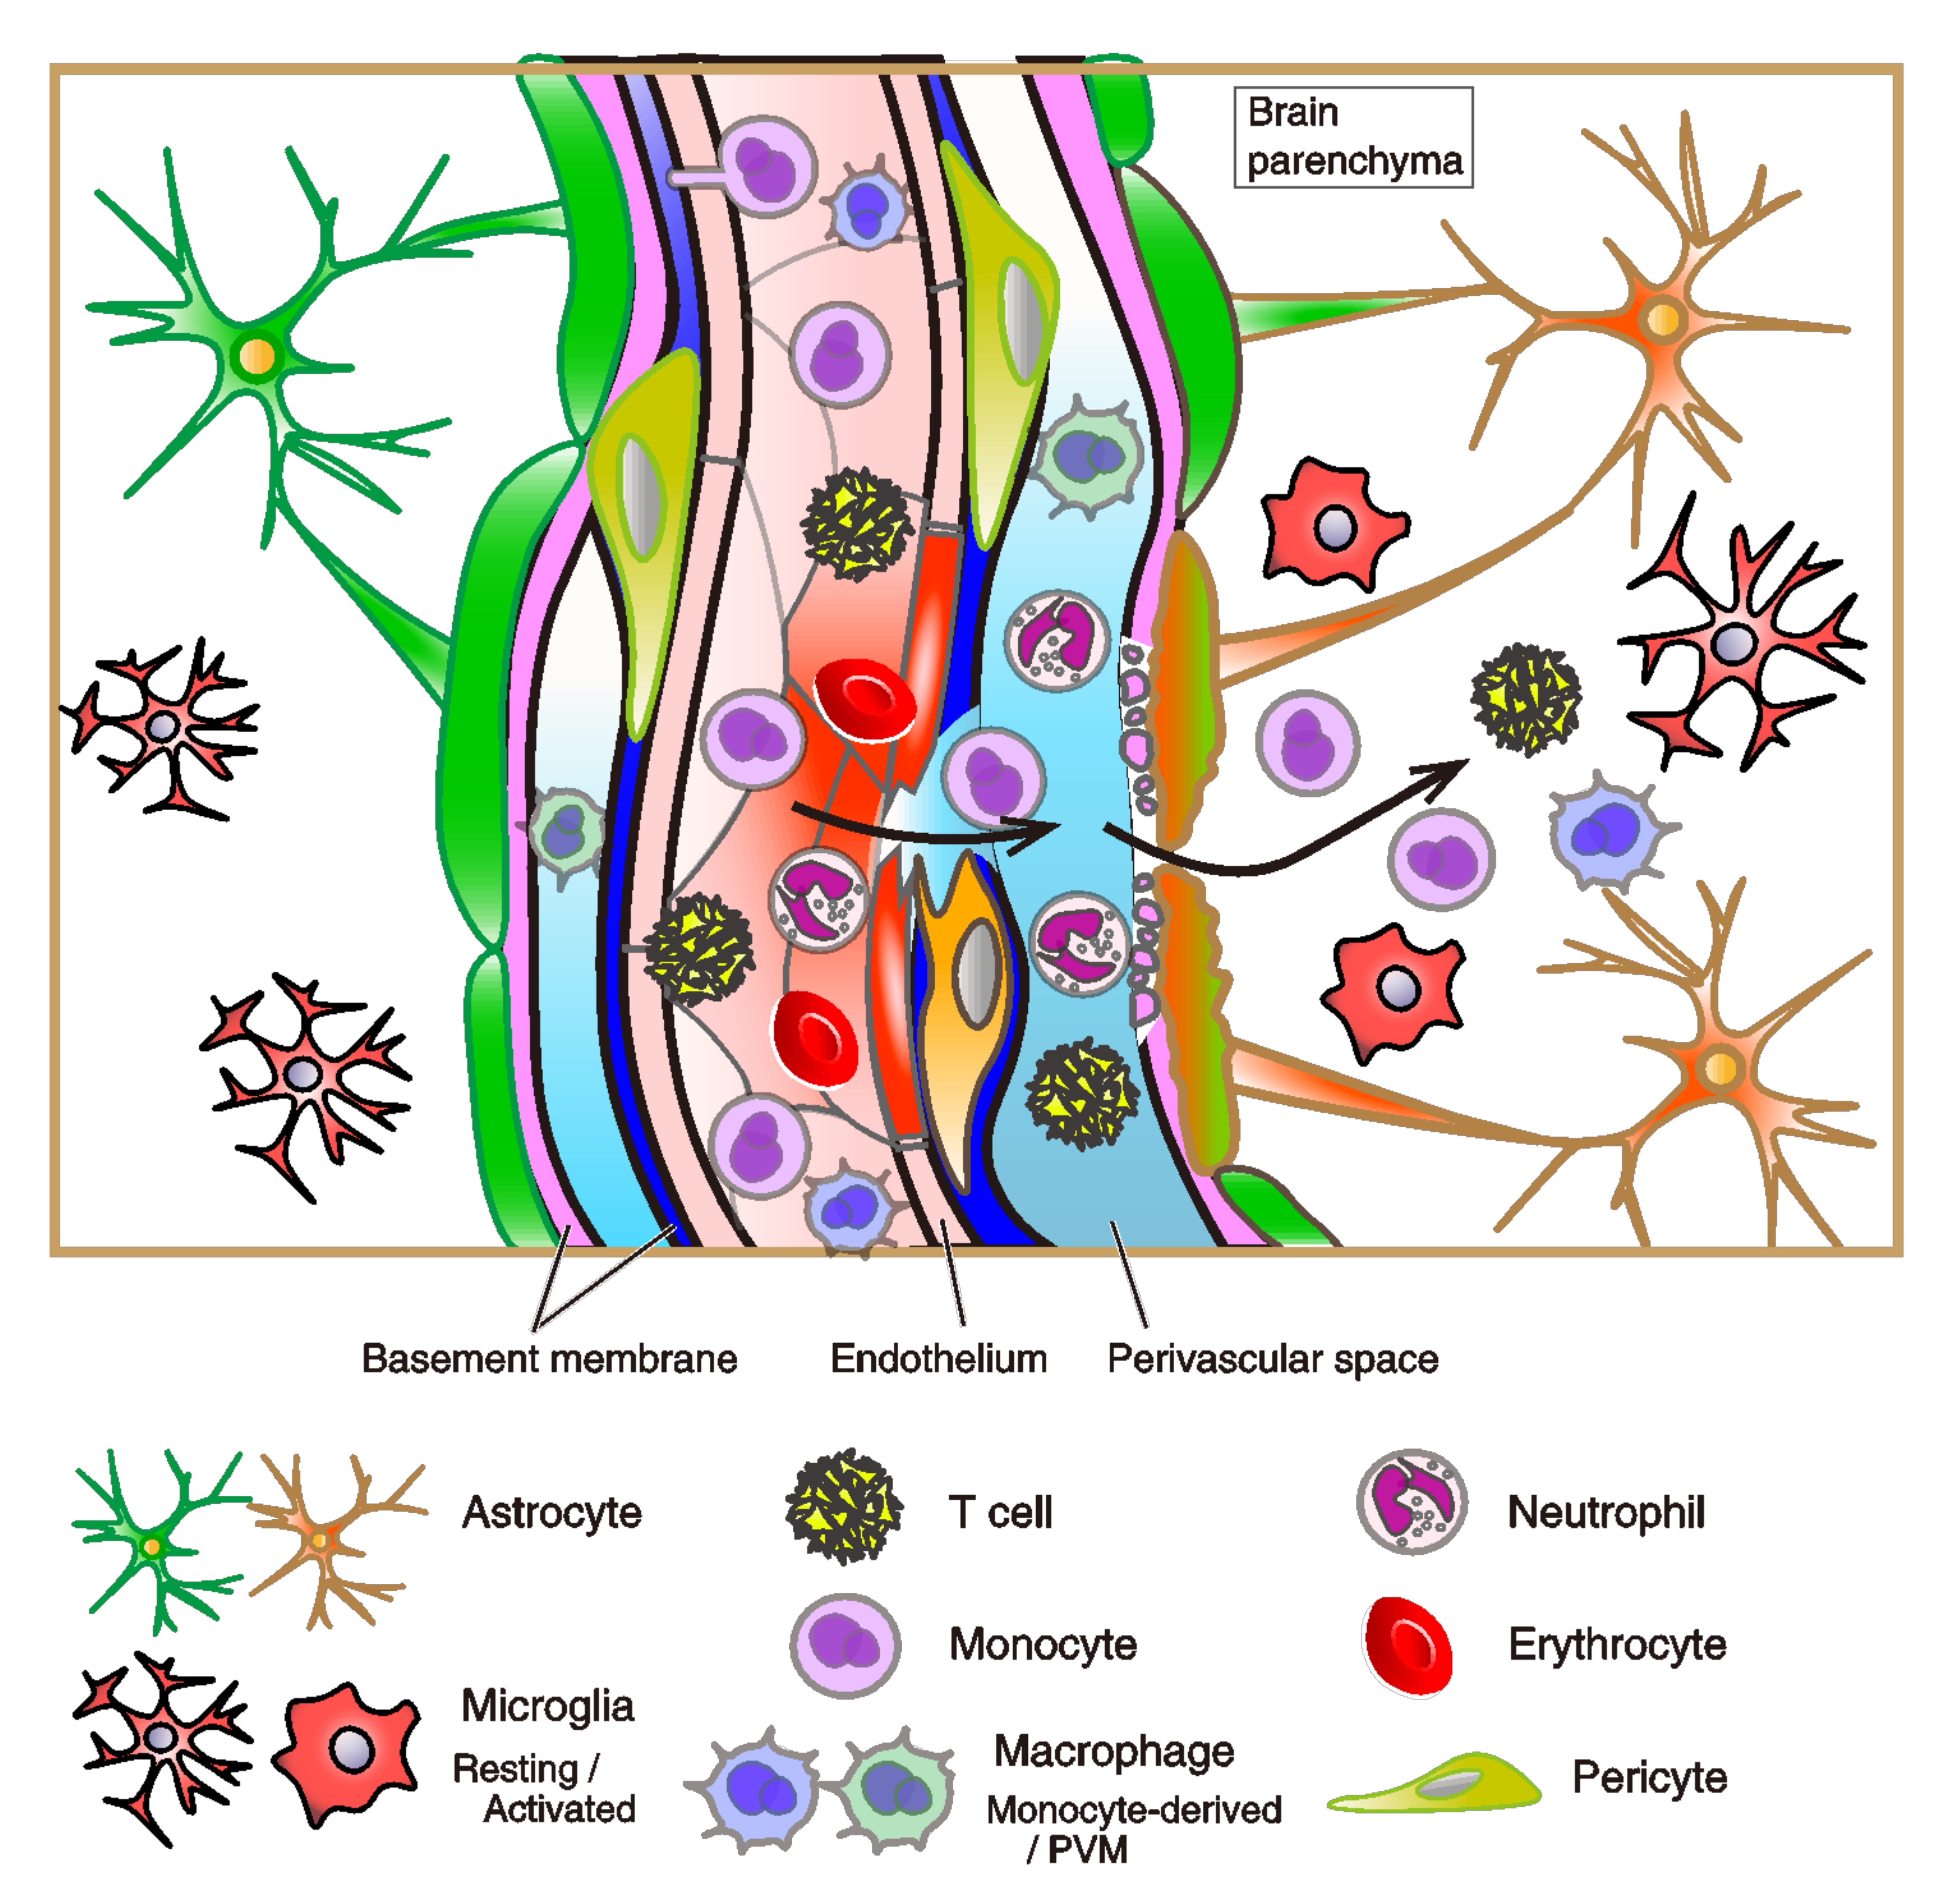 Biology Free Full Text A Destruction Model Of The Vascular And Lymphatic Systems In The Emergence Of Psychiatric Symptoms Html